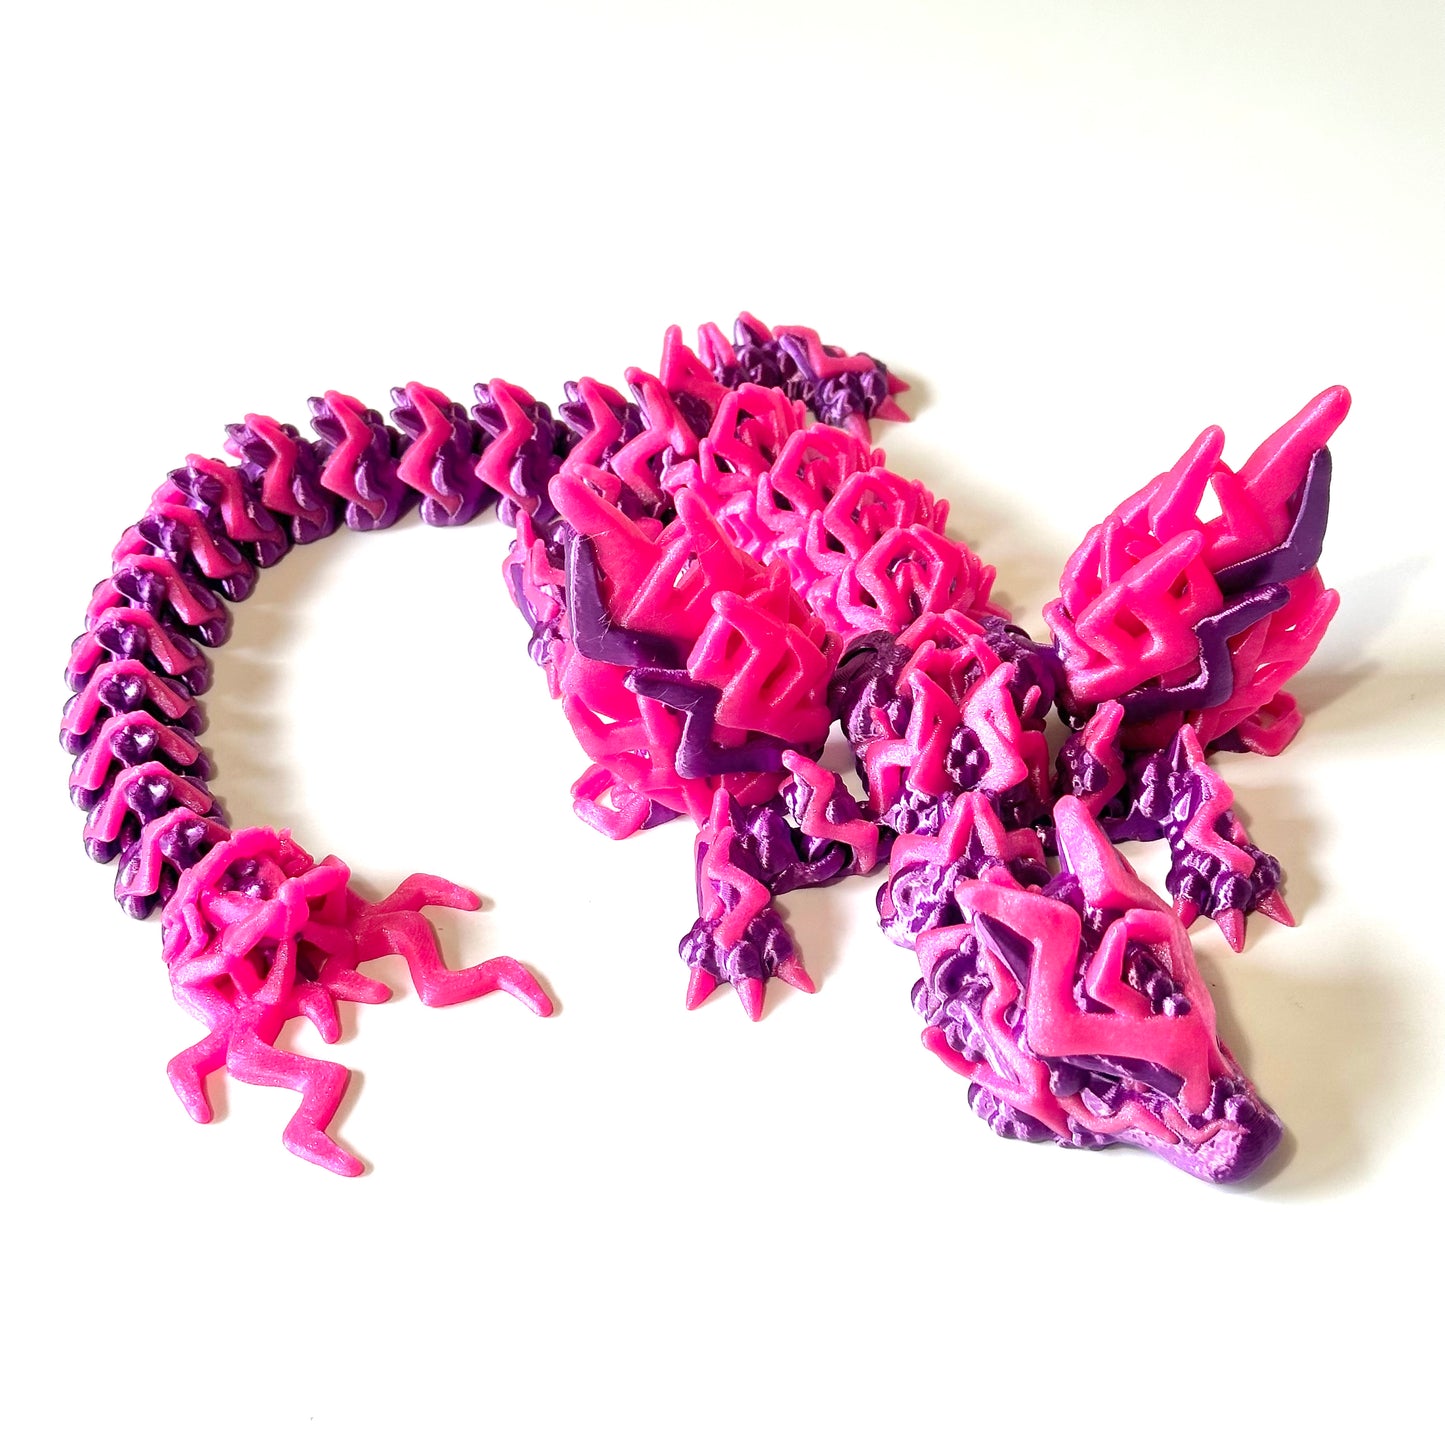 Large Storm Wing Dragon - 3D Printed Articulating Figure